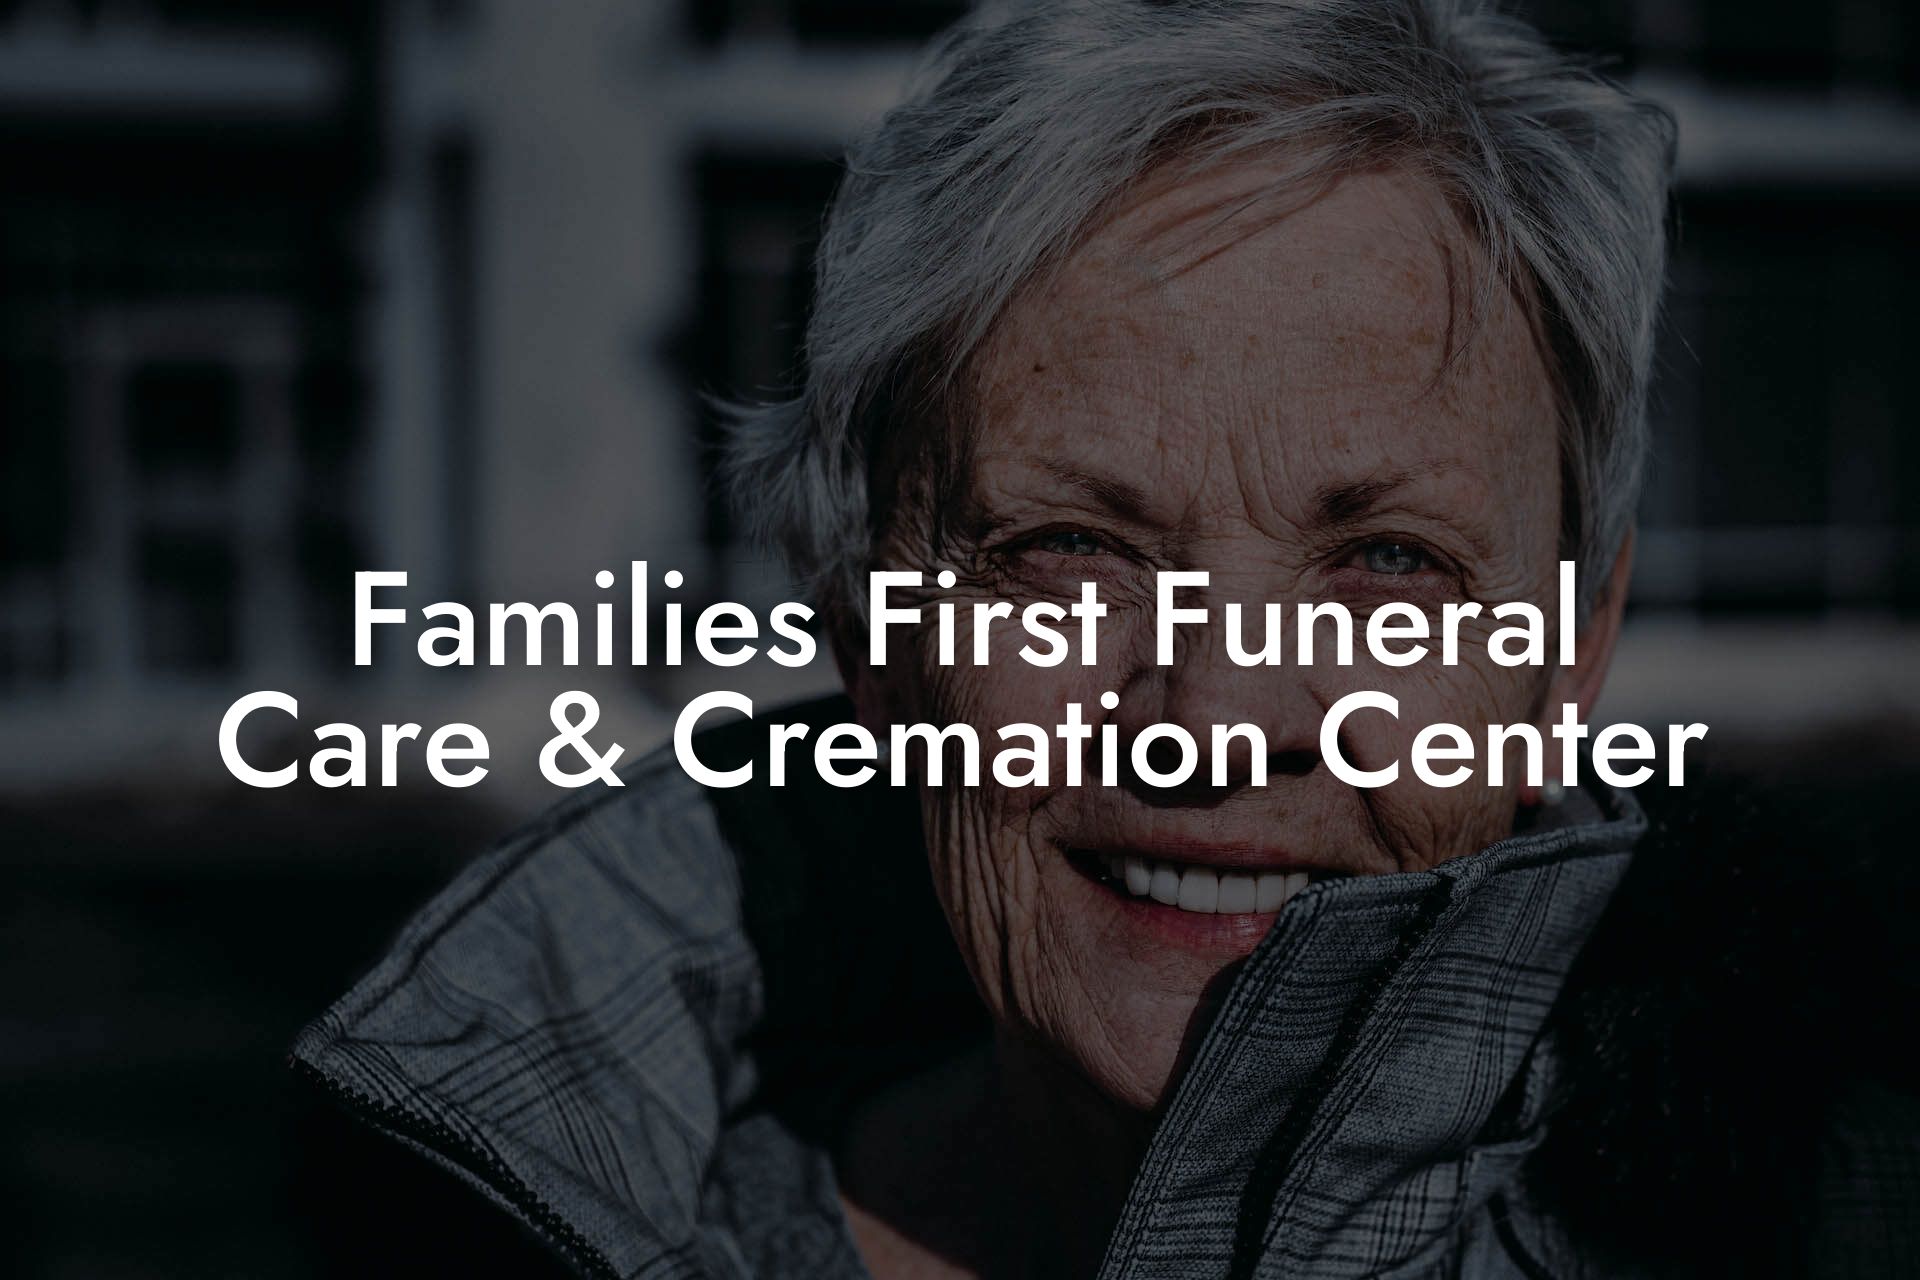 Families First Funeral Care & Cremation Center